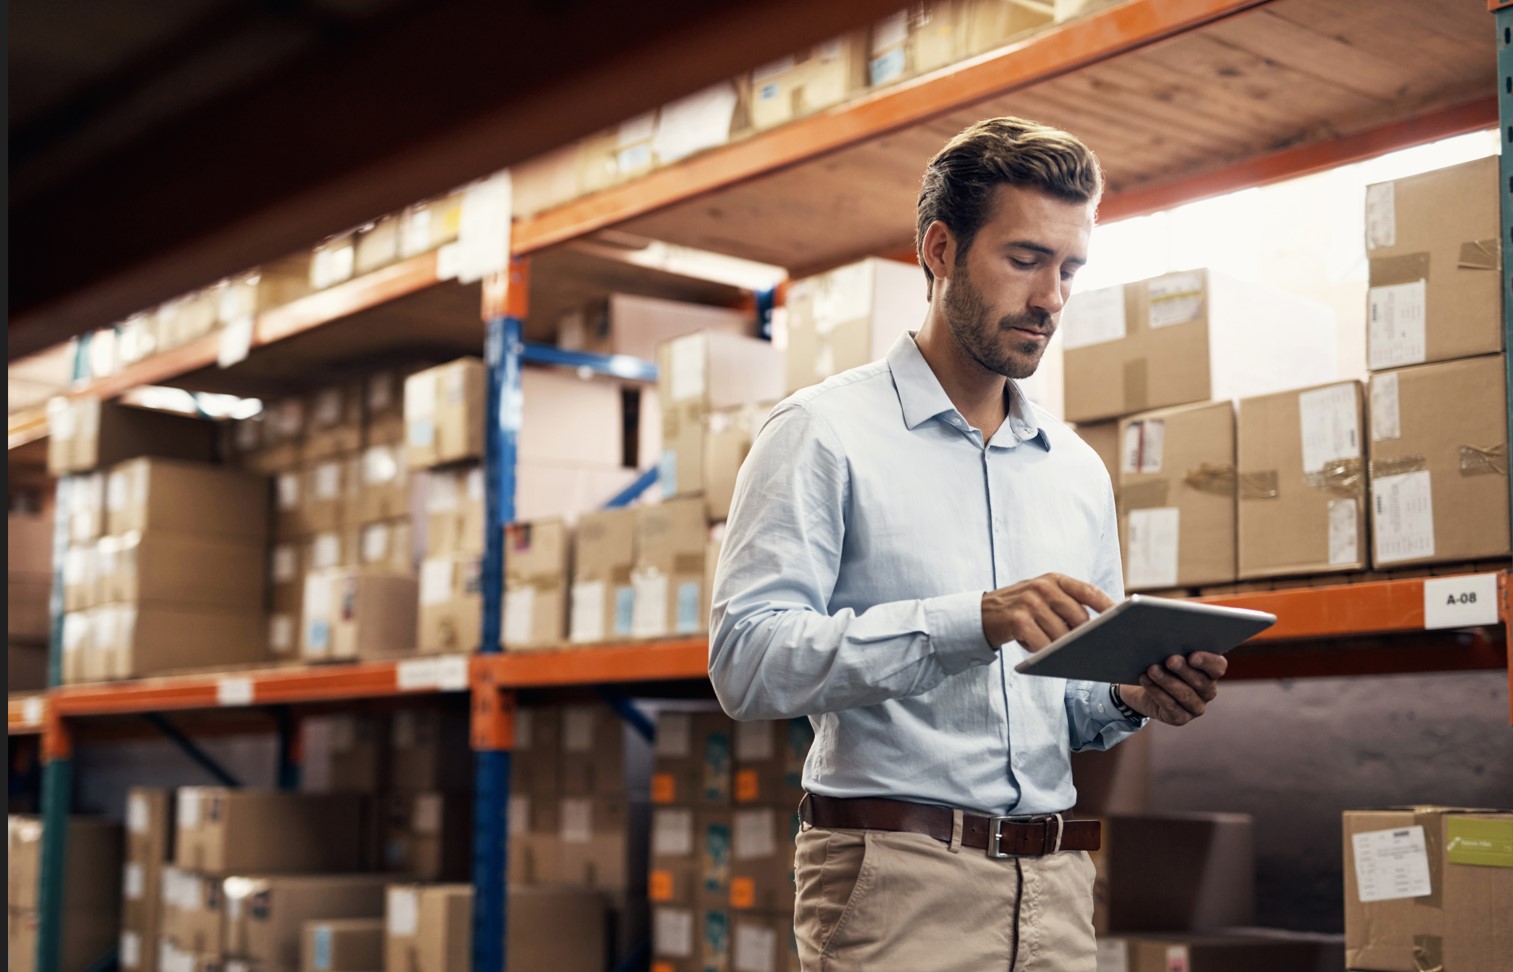 man walking with tablet in front of boxes on warehouse shelves